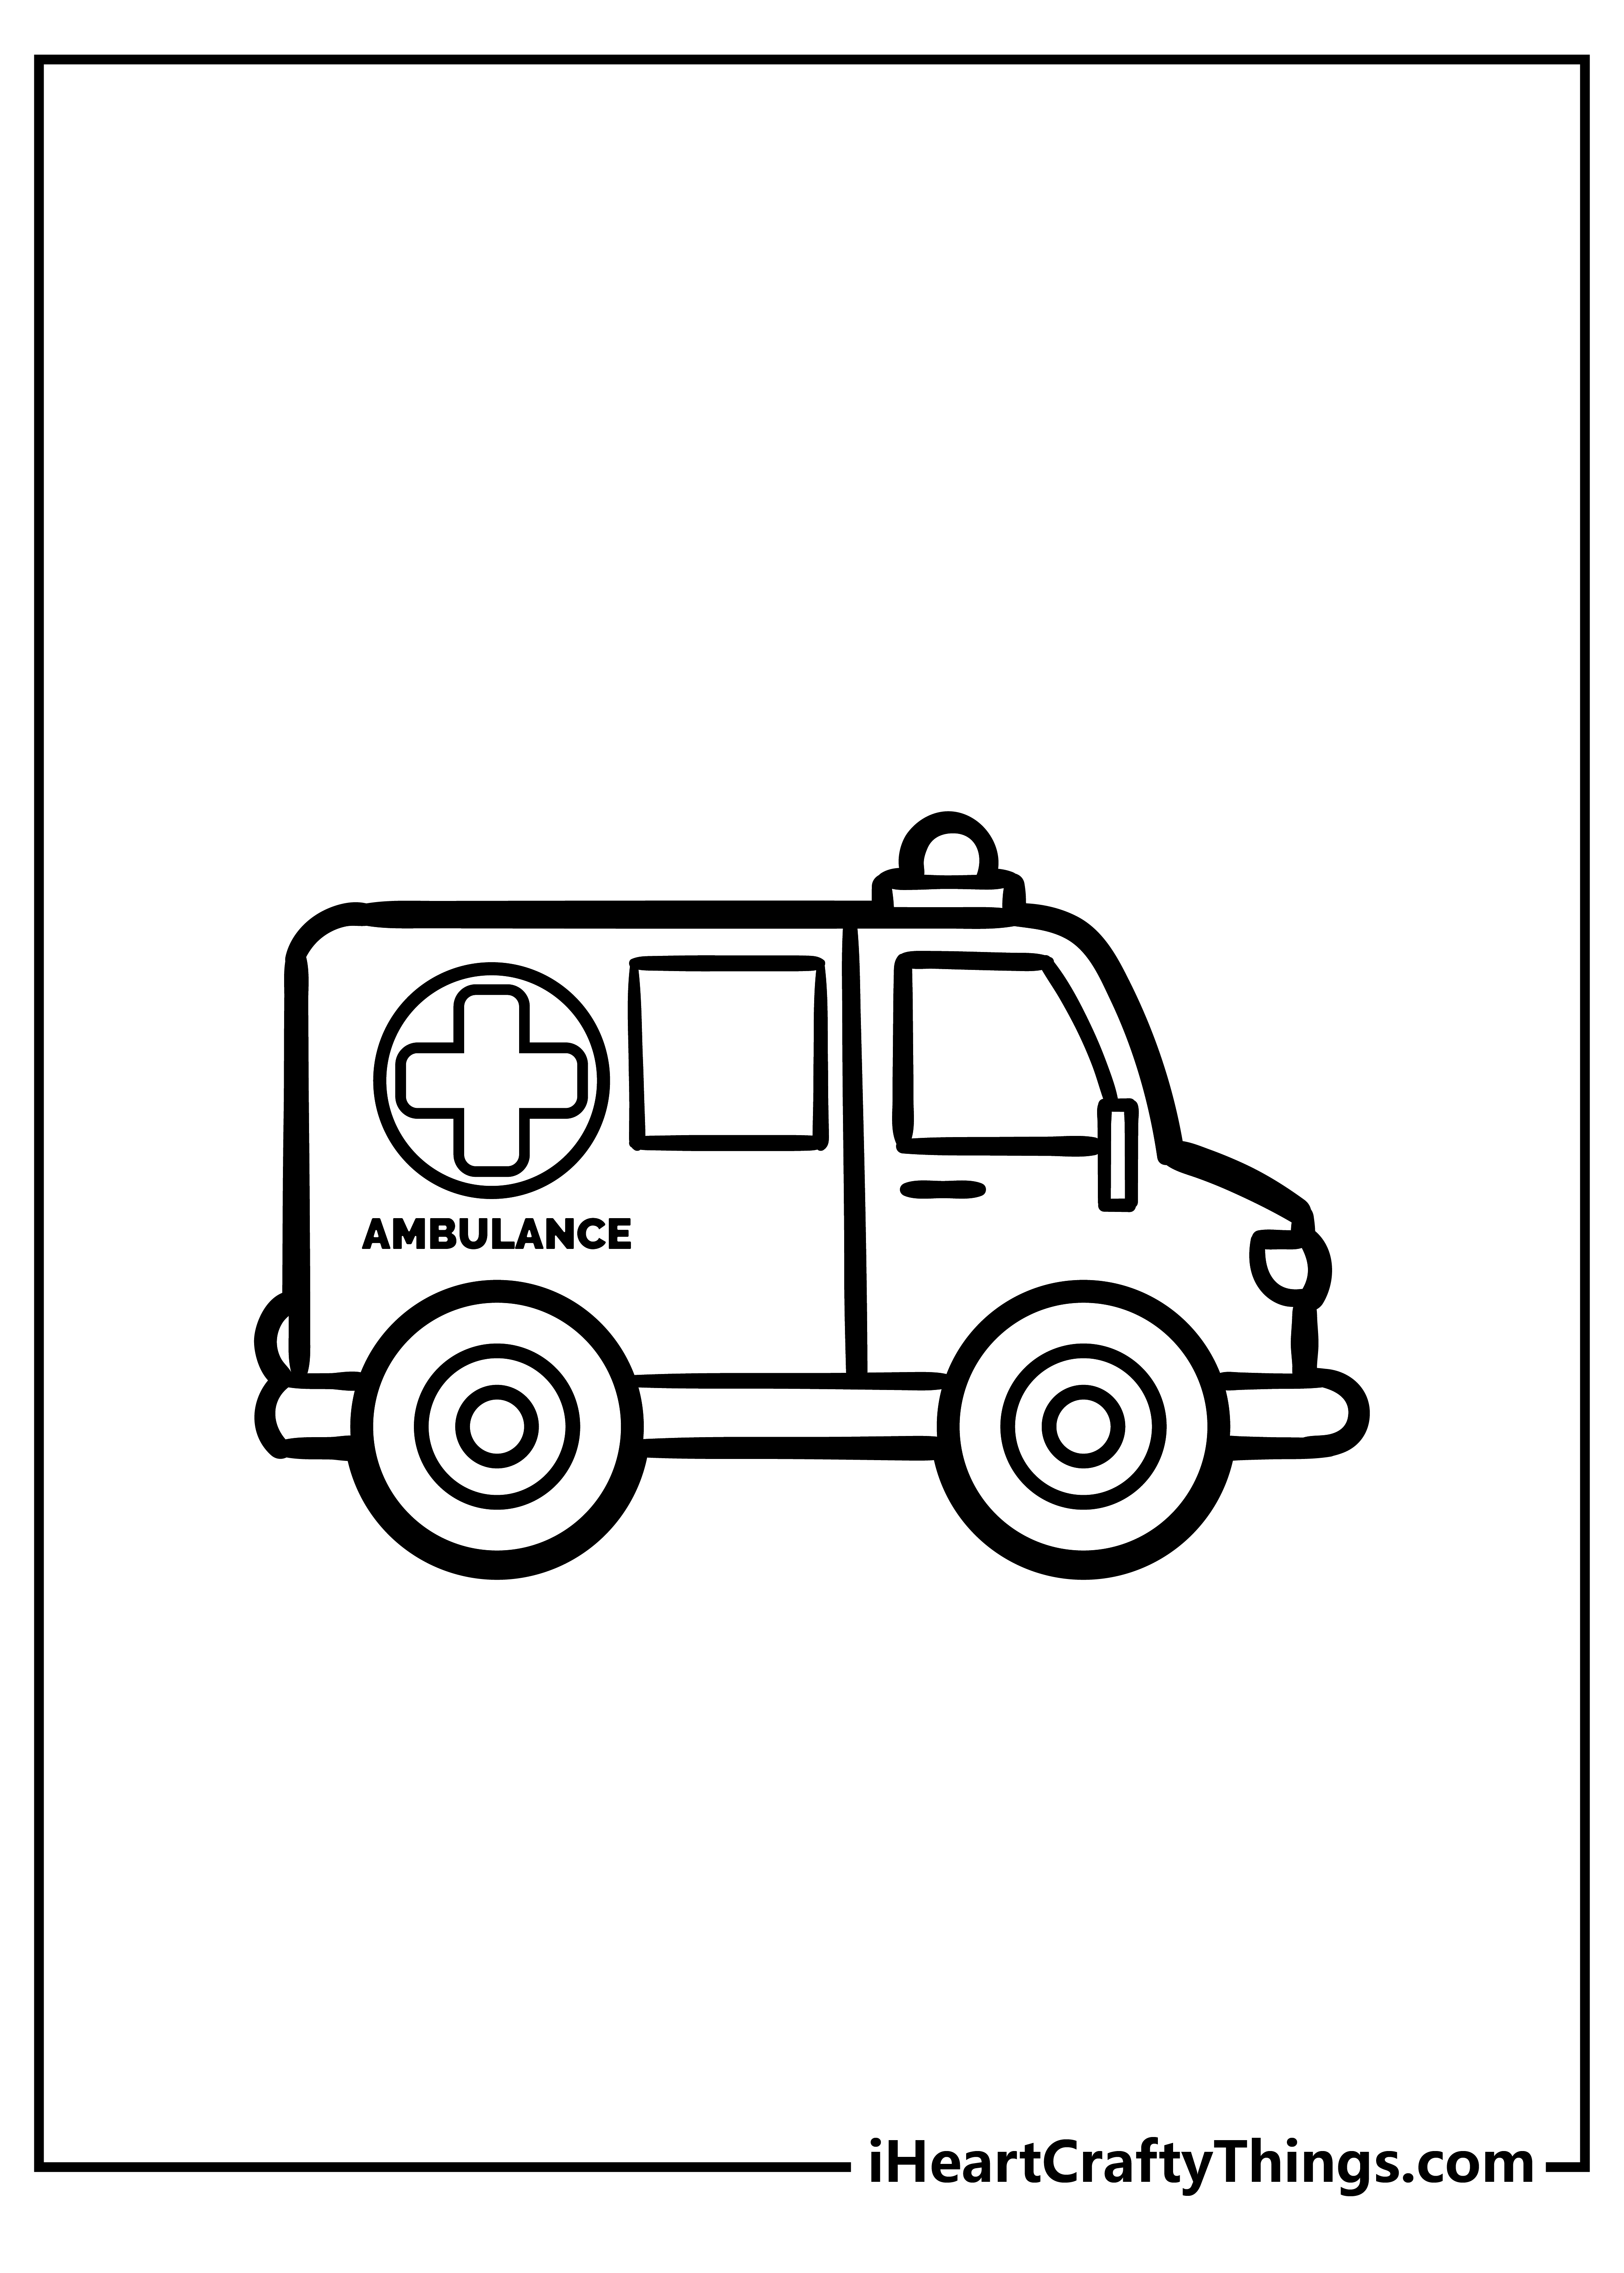 Ambulance Coloring Book for kids free printable